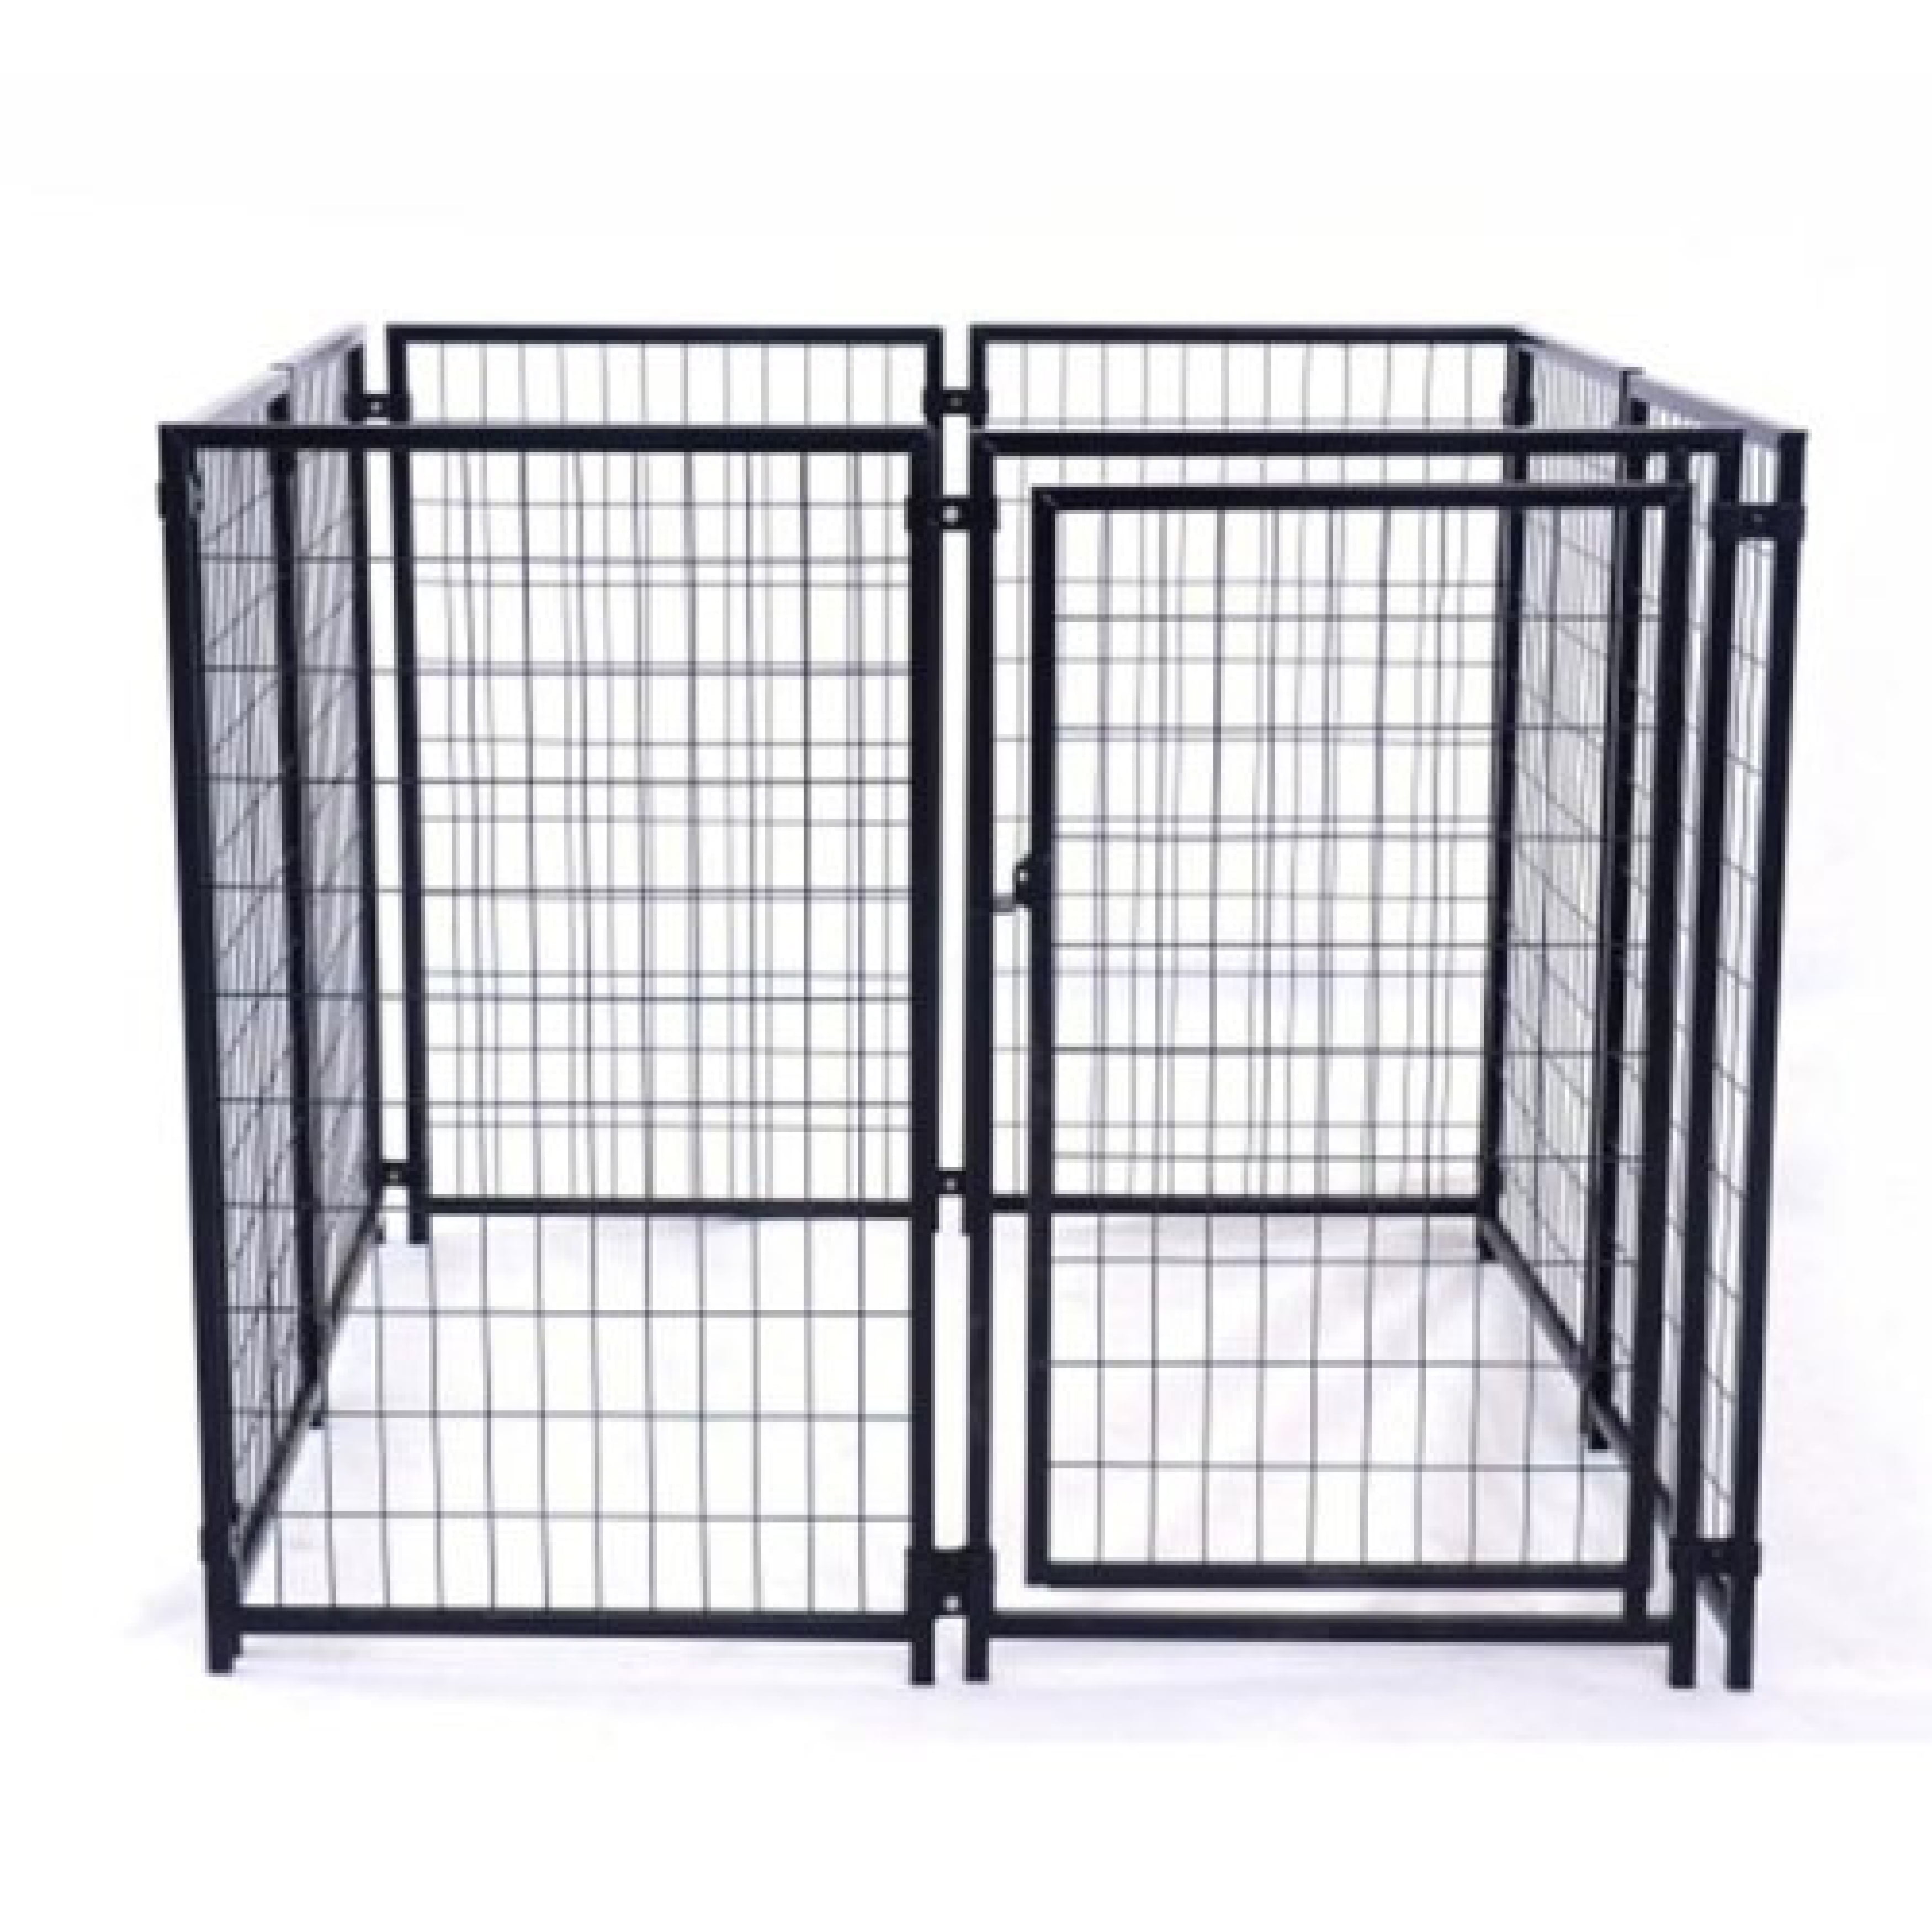 Picture of Aleko DK5x5x4SQ-UNB 5 x 5 x 4 ft. Dog Kennel Heavy Duty Pet, Playpen Chain Link Dog Exercise Pen Cat Fence